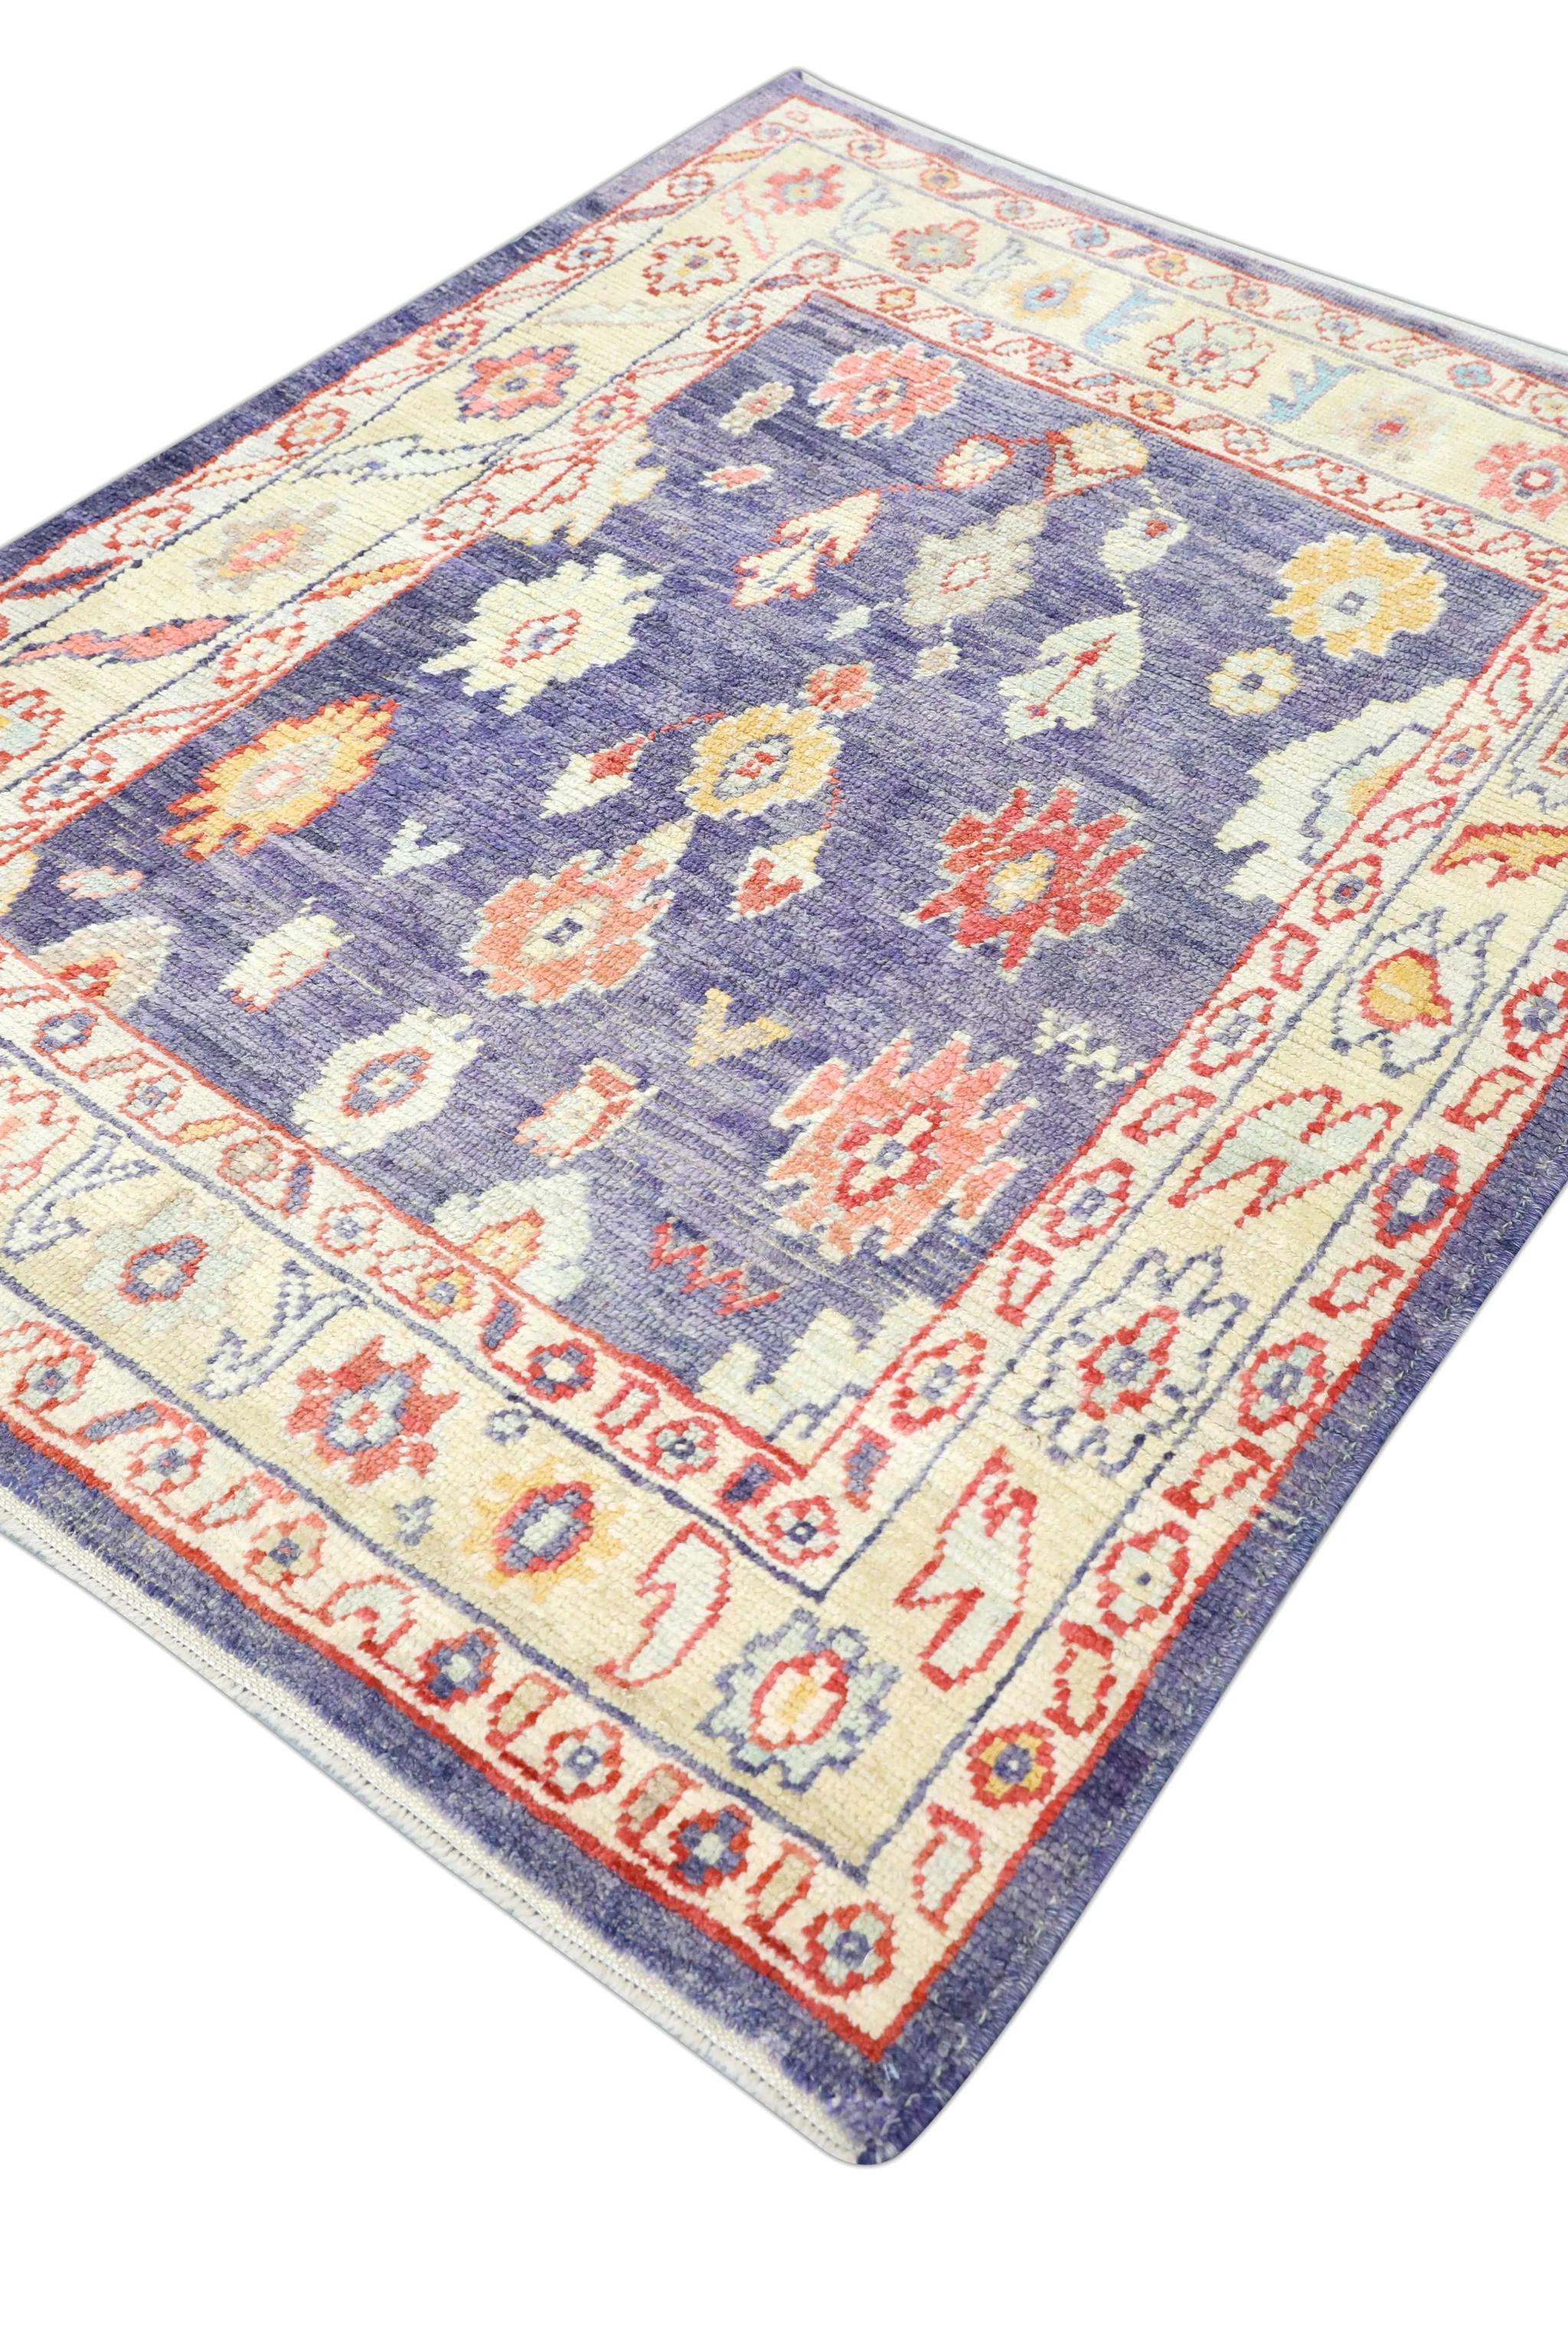 This Turkish oushak rug is a stunning piece of art that has been handwoven using traditional techniques by skilled artisans. The rug features intricate patterns and a soft color palette that is achieved through the use of natural vegetable dyes.